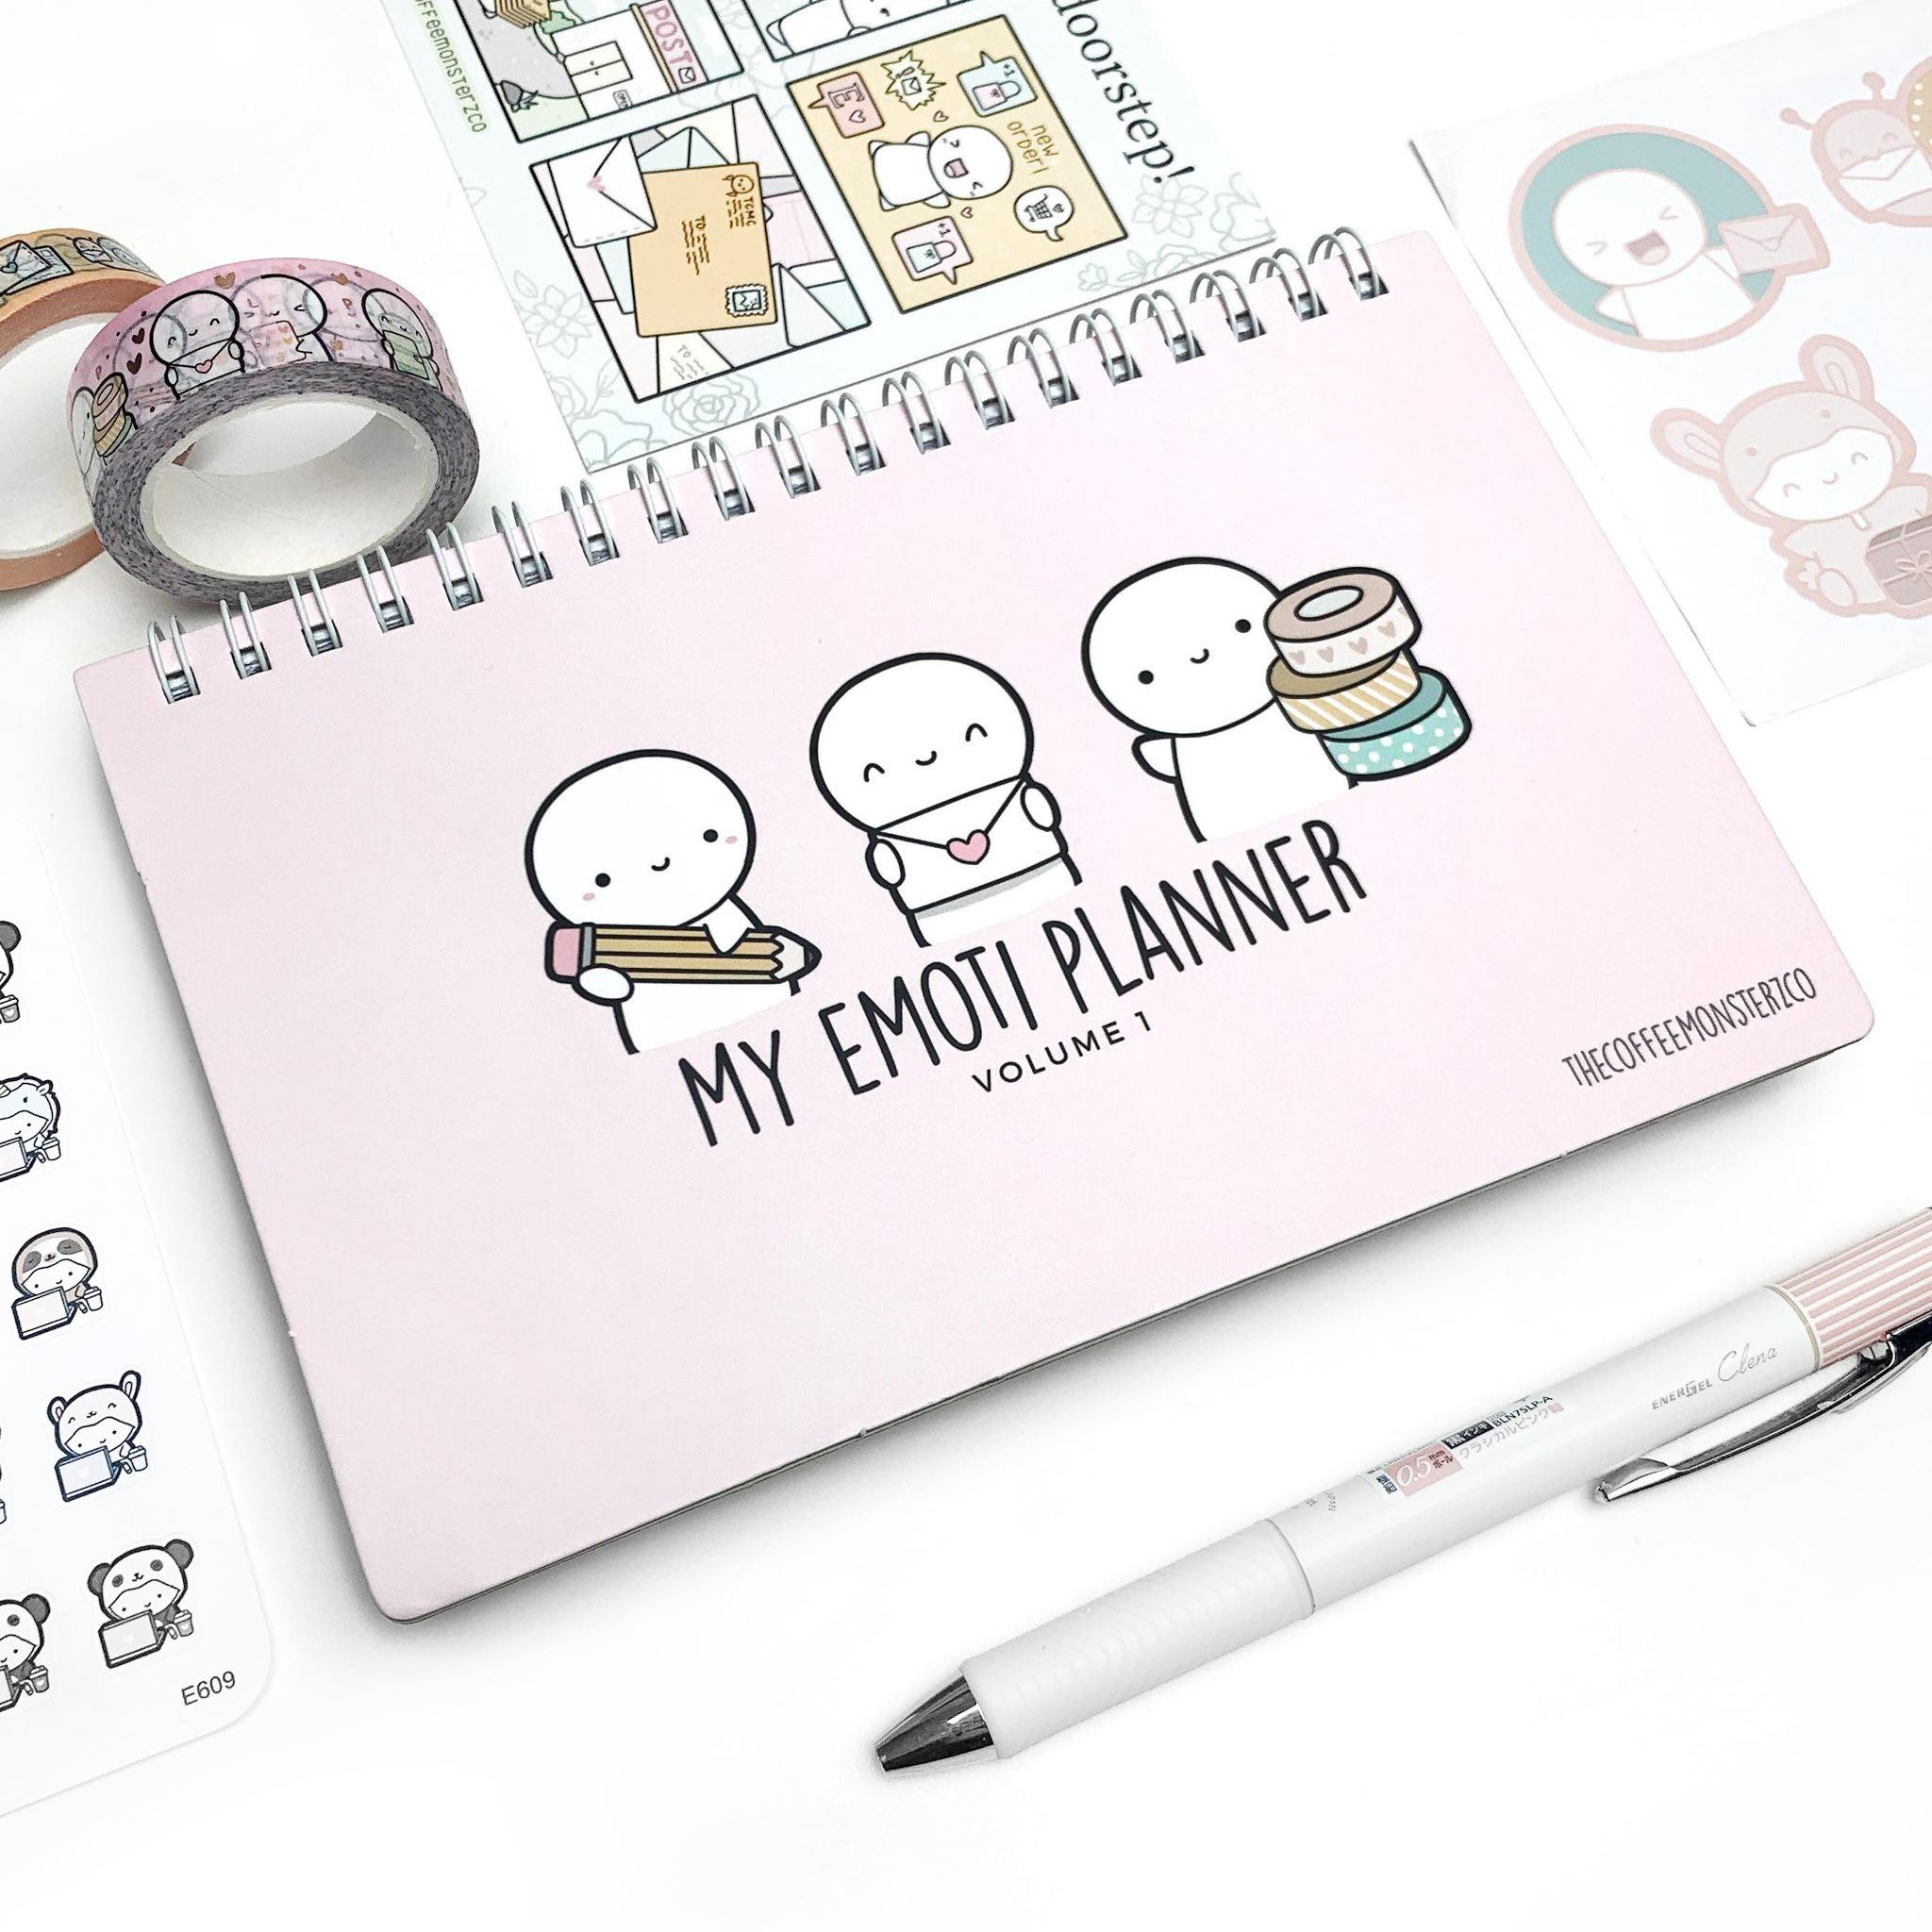 The first emoti planner by thecoffeemonsterzco